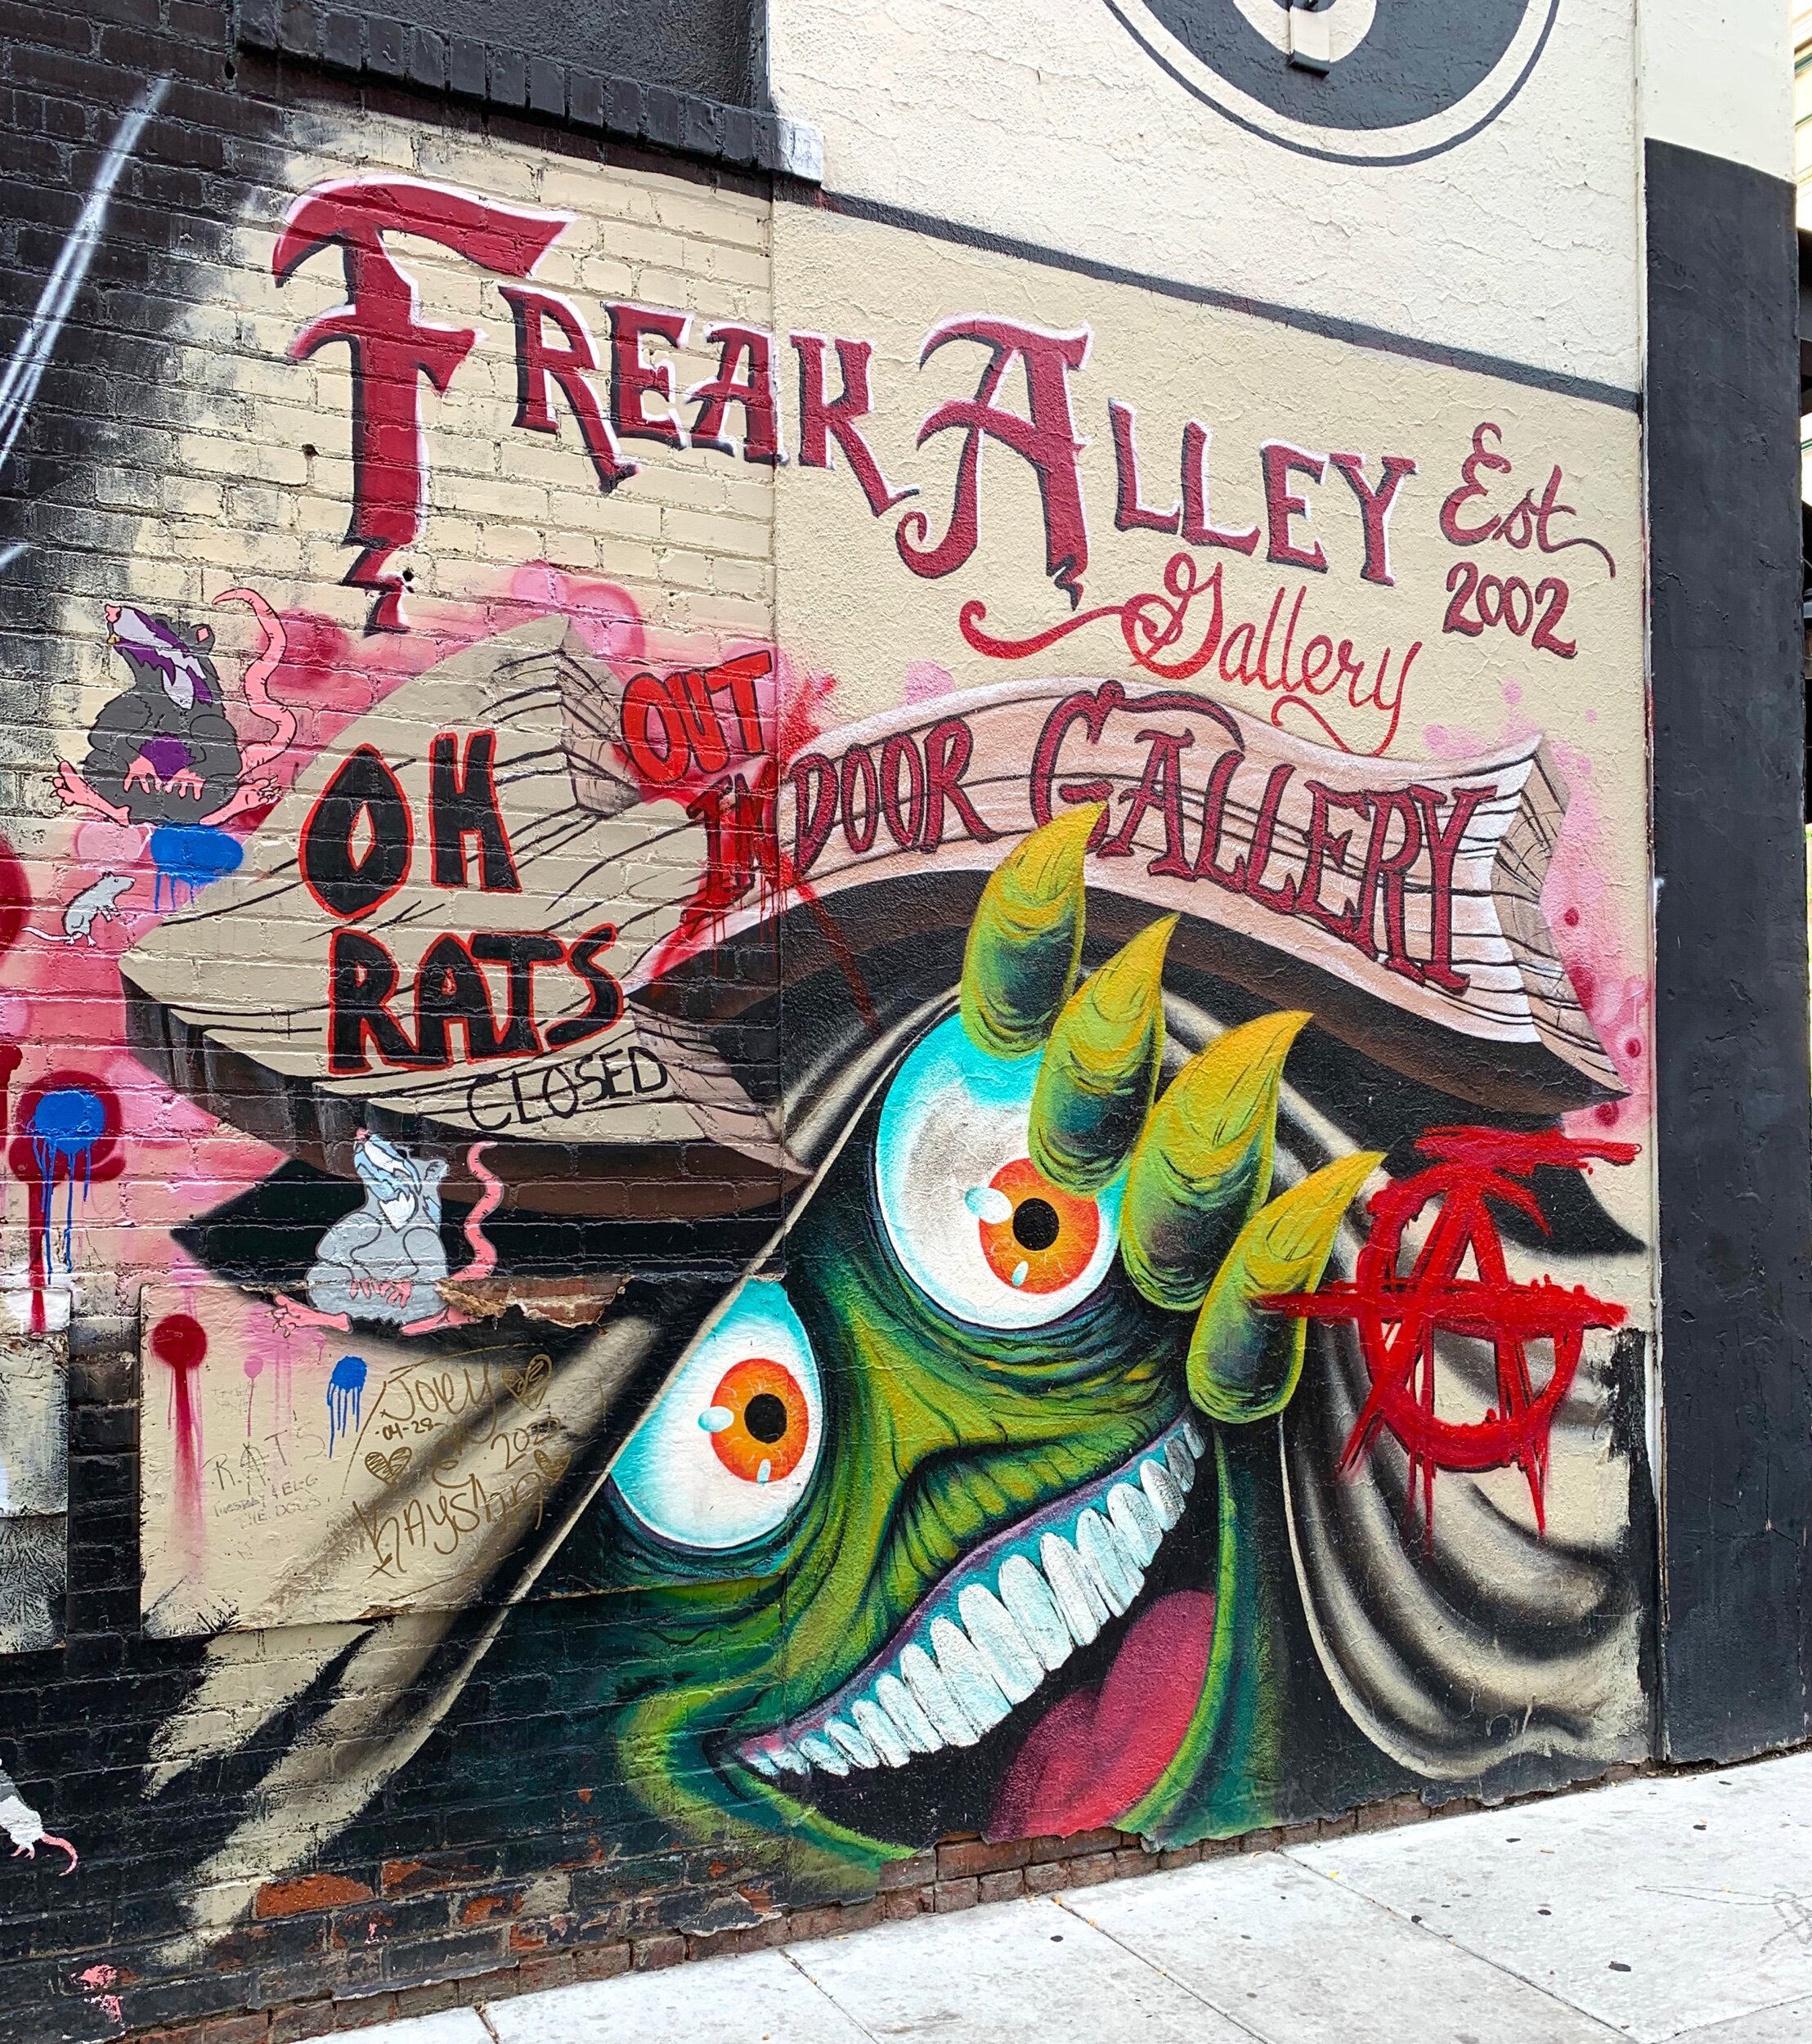  In the heart of downtown Boise, creative murals abound in  Fear Alley.  